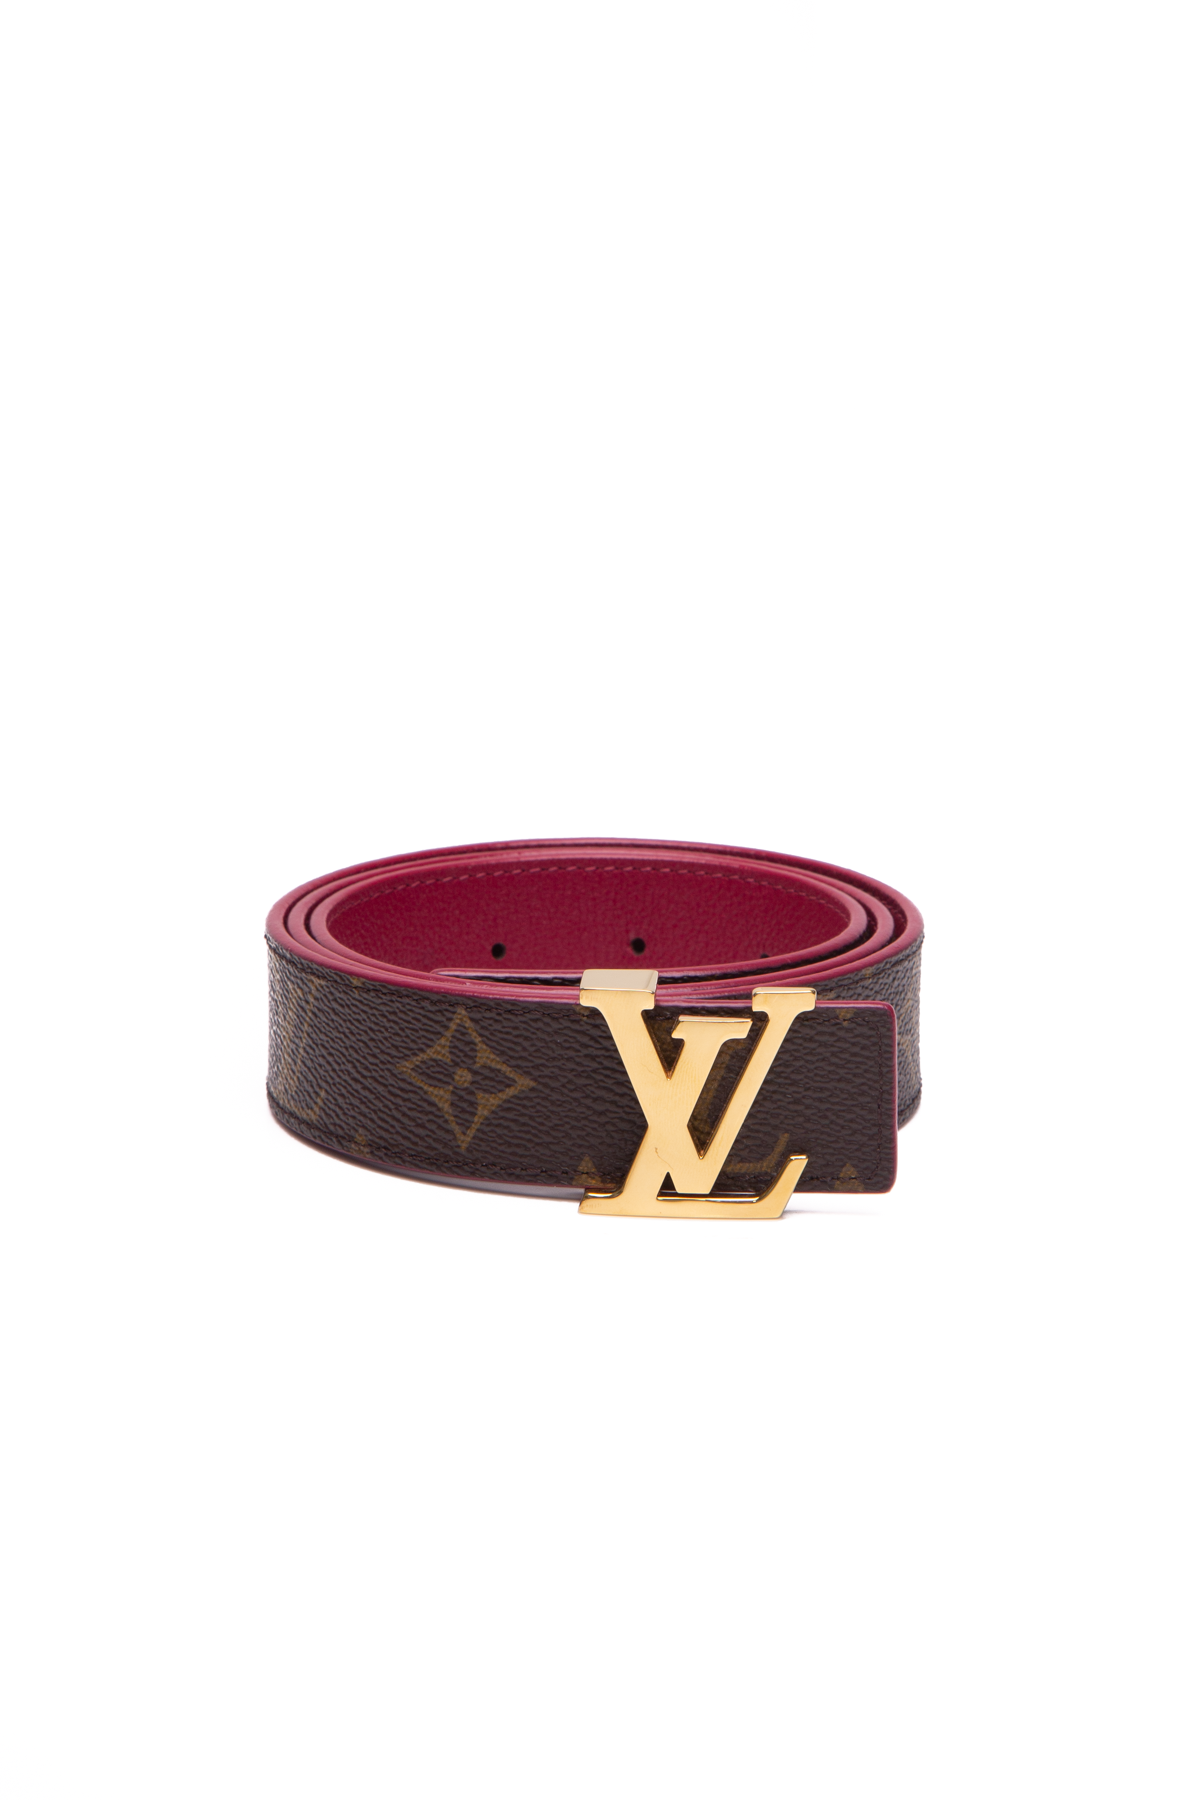 Louis Vuitton LV Initiales 30mm Reversible Belt Red + Calf Leather. Size 80 cm